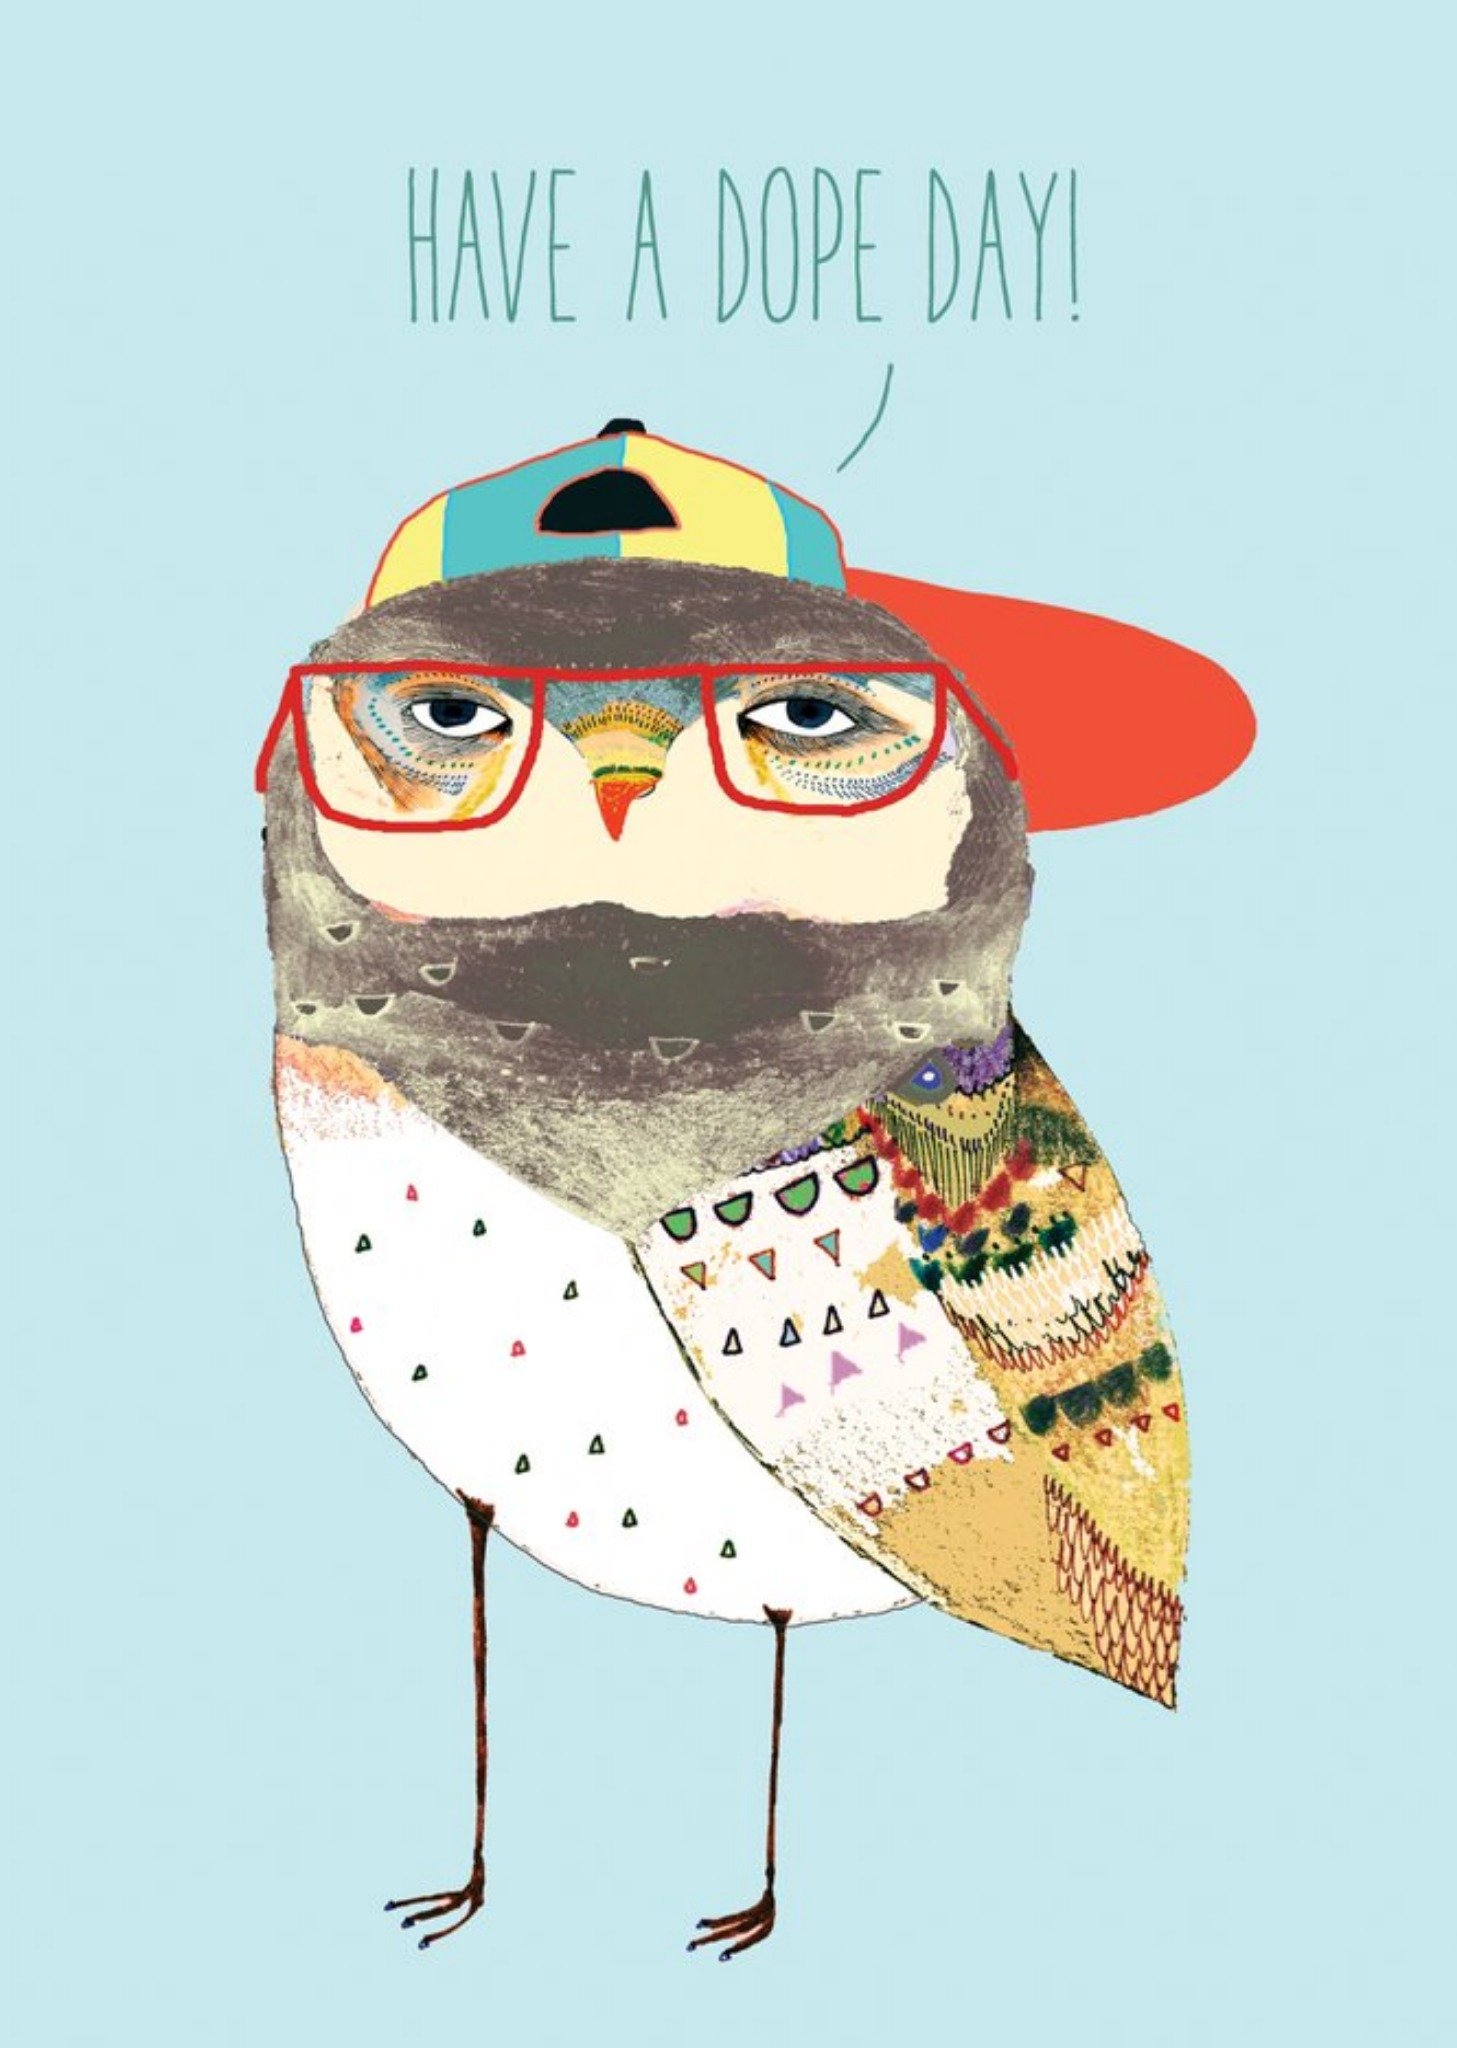 Brainbox Candy Funny Owl Cool Have A Dope Day Birthday Card Ecard